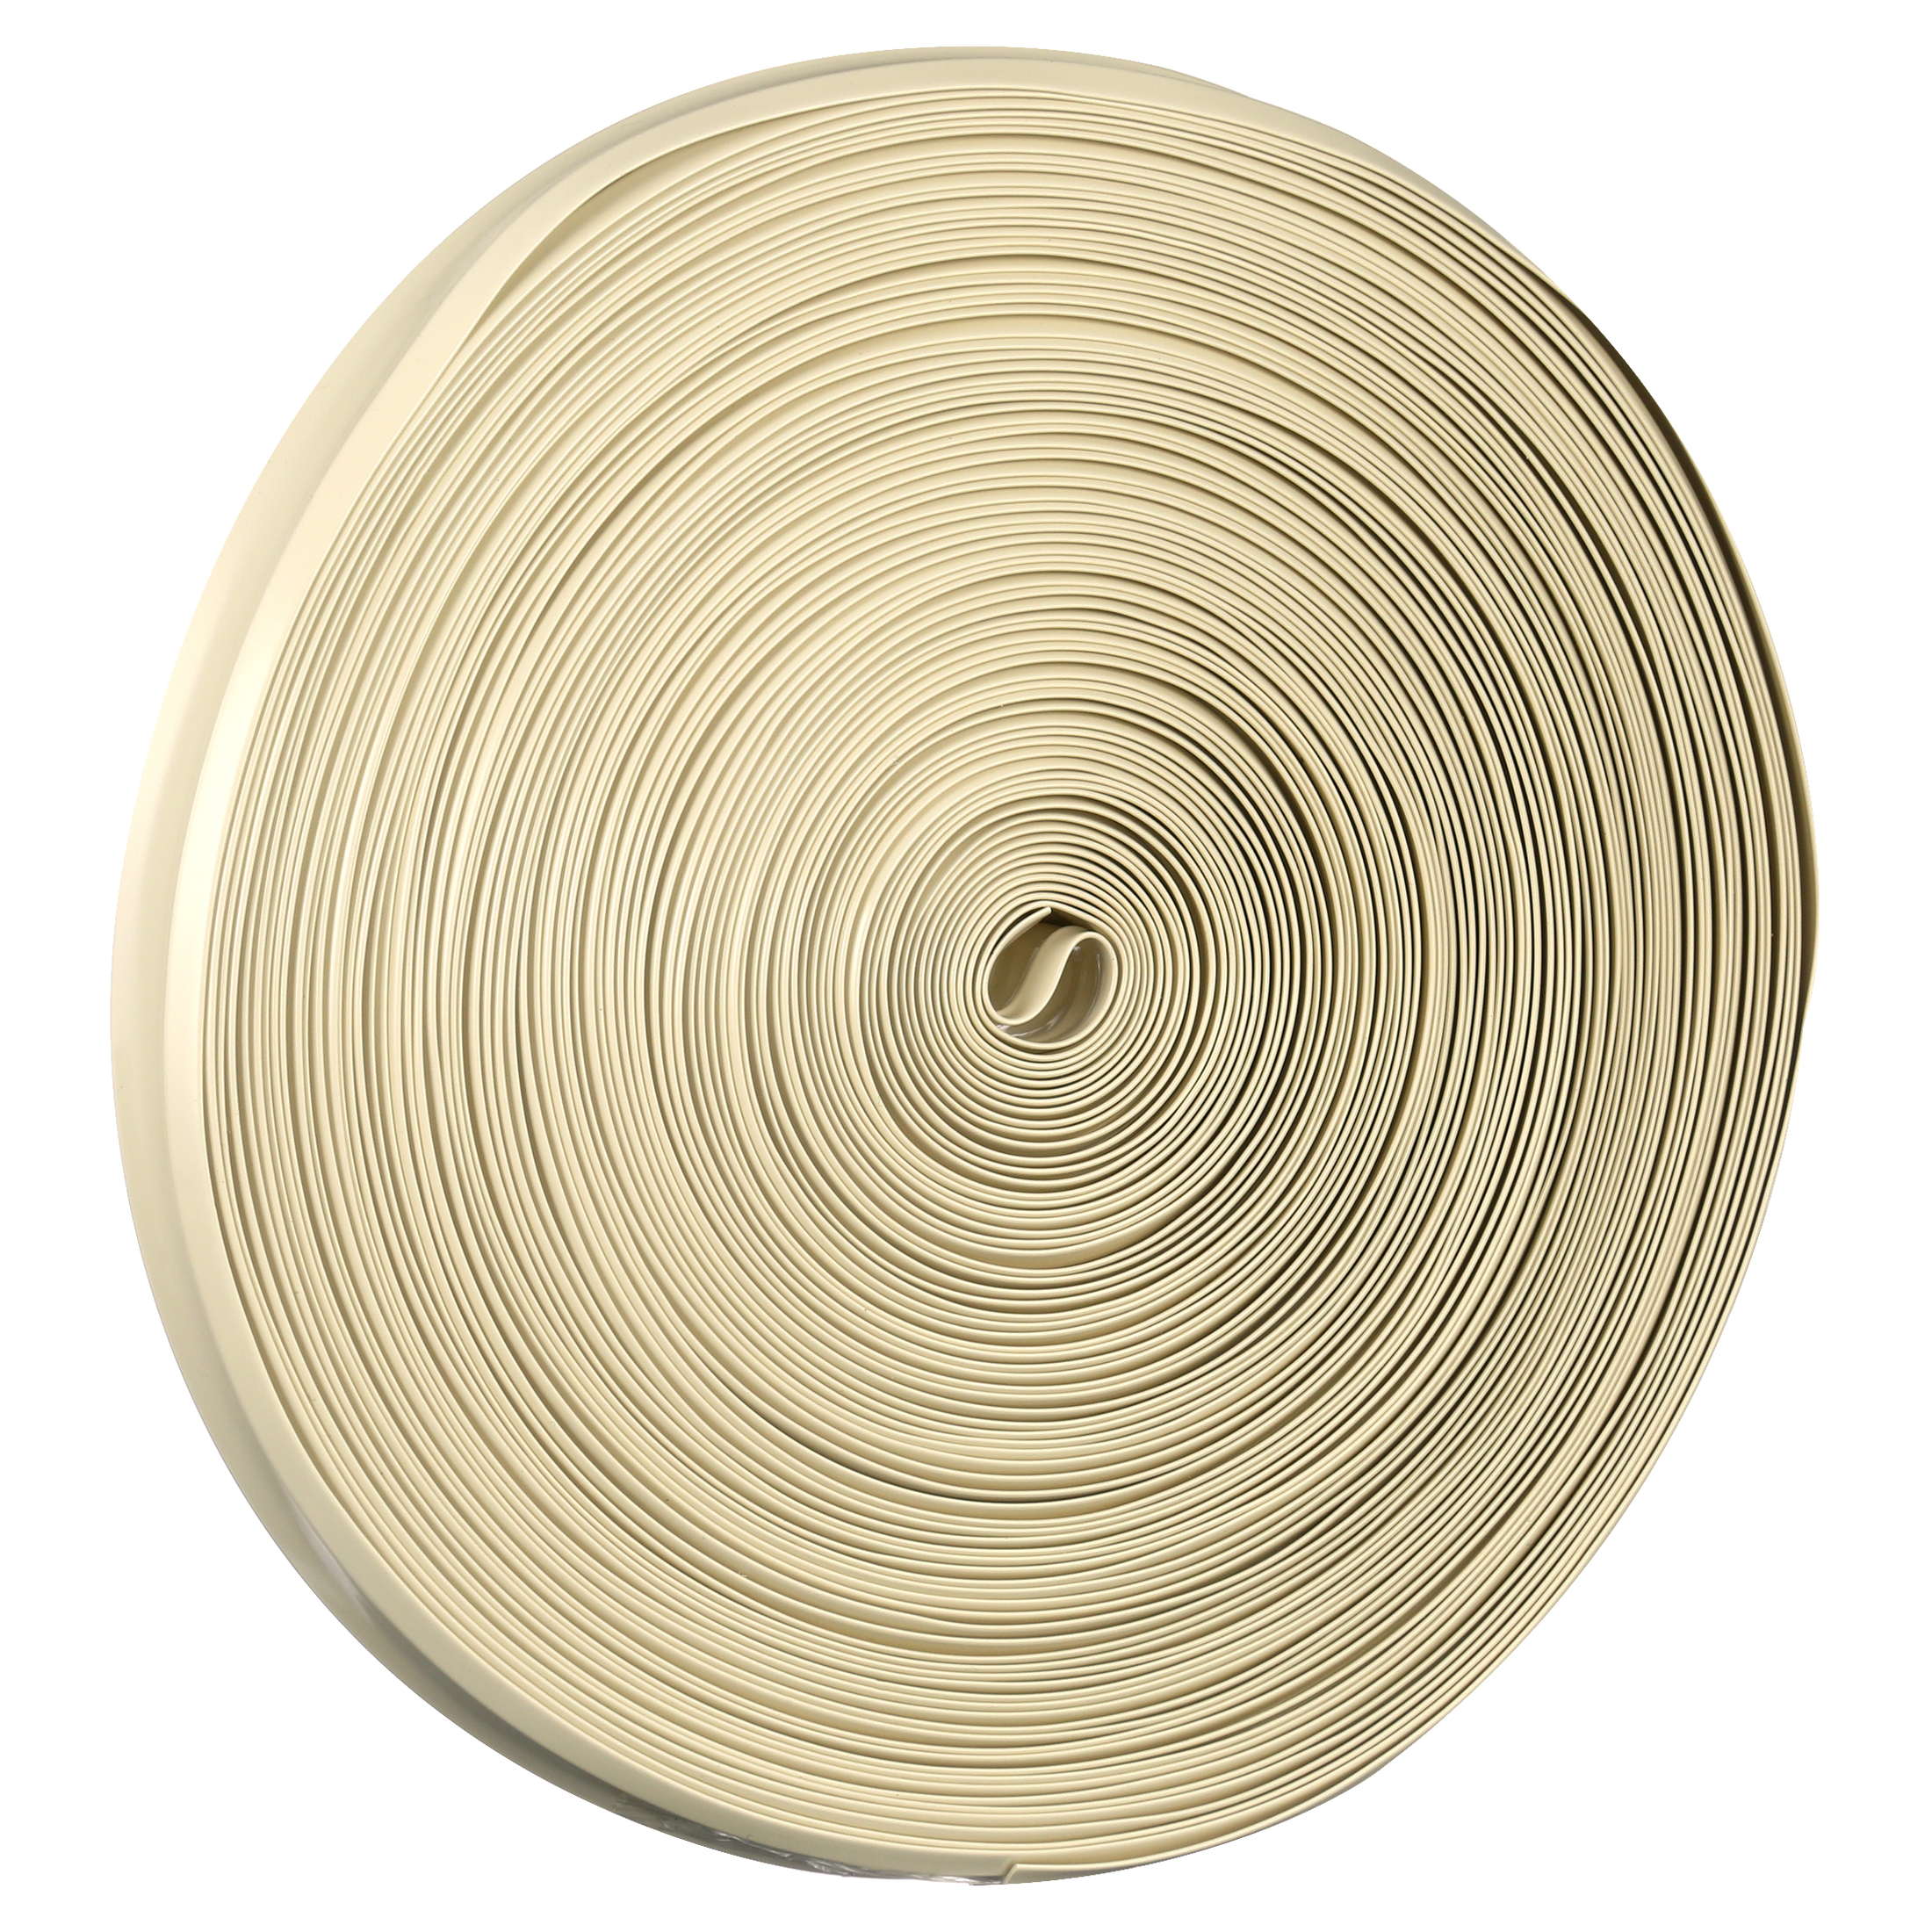 Camco 25222 - Colonial White Vinyl Trim Insert - image 6 of 7